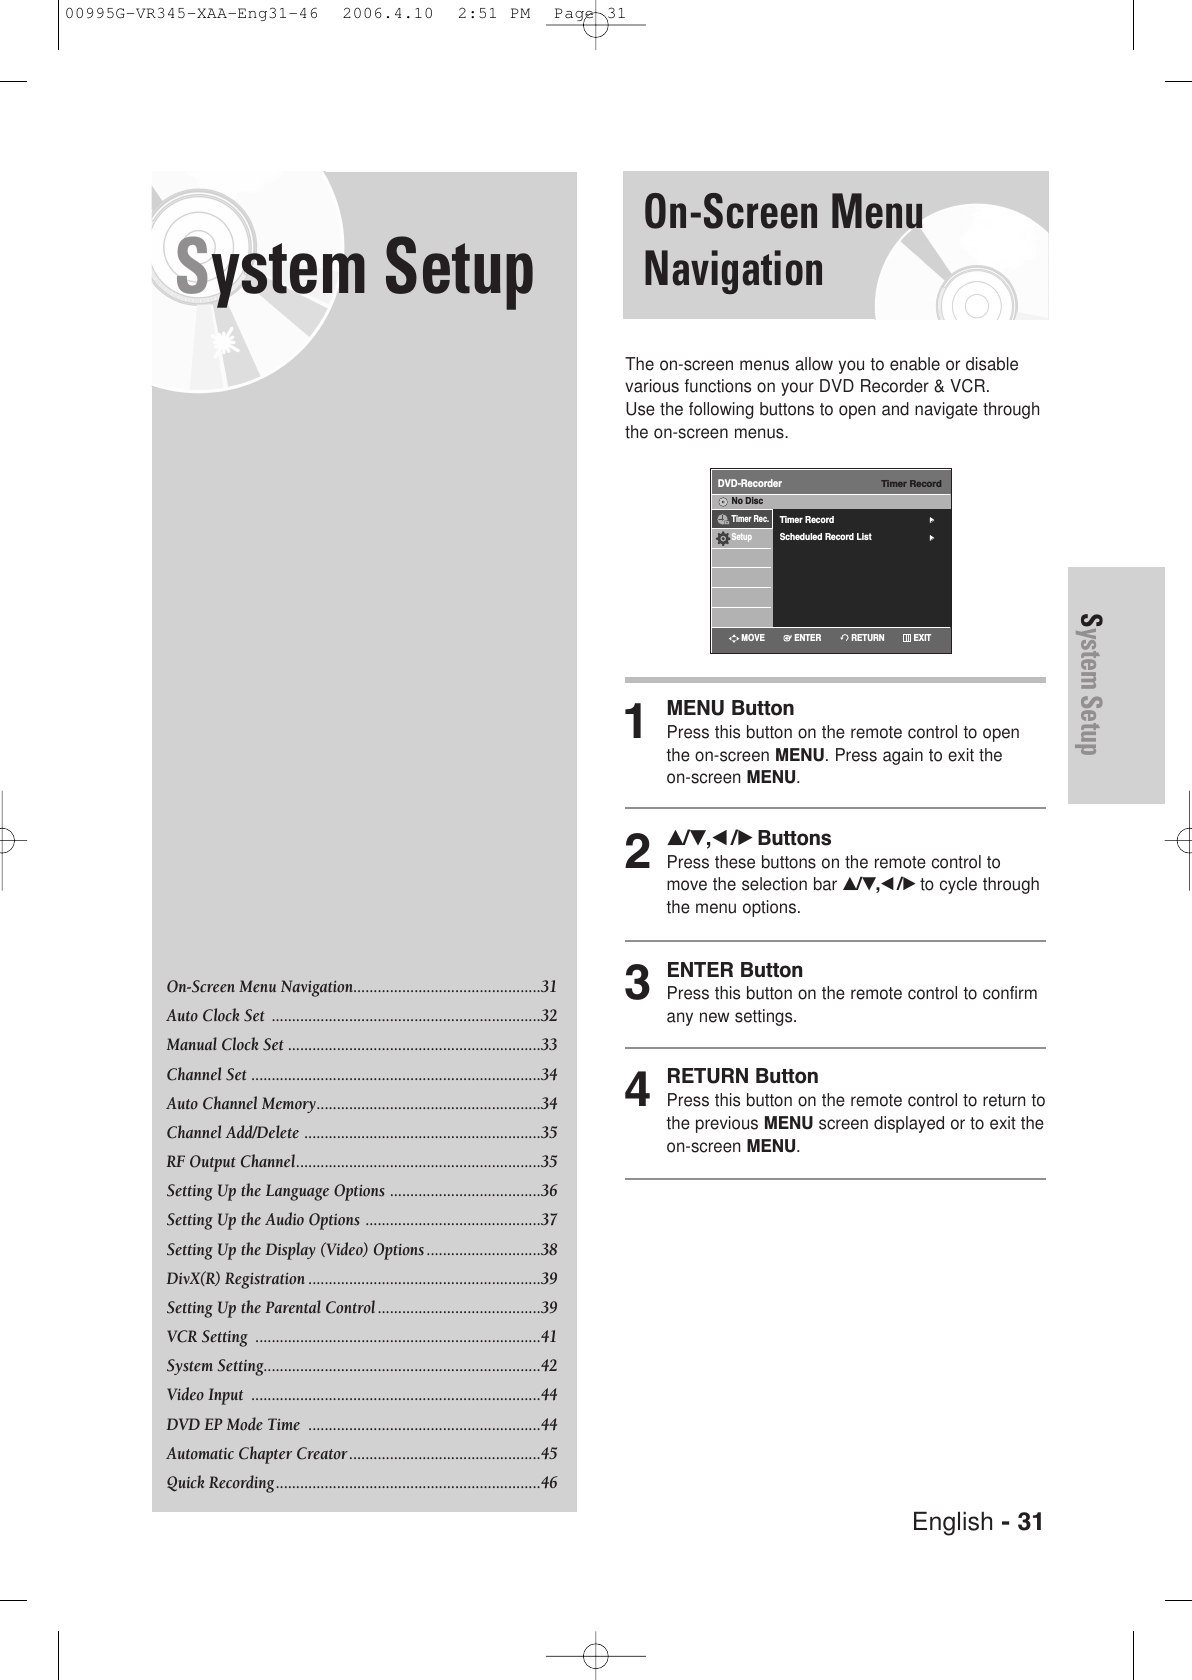 English - 31System SetupSystem Setup On-Screen MenuNavigationThe on-screen menus allow you to enable or disablevarious functions on your DVD Recorder &amp; VCR. Use the following buttons to open and navigate throughthe on-screen menus.1MENU ButtonPress this button on the remote control to openthe on-screen MENU. Press again to exit the on-screen MENU.2…/†,œ /√ ButtonsPress these buttons on the remote control tomove the selection bar …/†,œ /√to cycle throughthe menu options.3ENTER ButtonPress this button on the remote control to confirmany new settings.4RETURN ButtonPress this button on the remote control to return tothe previous MENU screen displayed or to exit theon-screen MENU.On-Screen Menu Navigation..............................................31Auto Clock Set  ..................................................................32Manual Clock Set ..............................................................33Channel Set .......................................................................34Auto Channel Memory.......................................................34Channel Add/Delete ..........................................................35RF Output Channel............................................................35Setting Up the Language Options .....................................36Setting Up the Audio Options ...........................................37Setting Up the Display (Video) Options ............................38DivX(R) Registration .........................................................39Setting Up the Parental Control ........................................39VCR Setting  ......................................................................41System Setting....................................................................42Video Input  .......................................................................44DVD EP Mode Time  .........................................................44Automatic Chapter Creator ...............................................45Quick Recording.................................................................46Timer RecordDVD-RecorderTimer Record√√Scheduled Record List√√No DiscTimer Rec.SetupRETURNENTERMOVE EXIT00995G-VR345-XAA-Eng31-46  2006.4.10  2:51 PM  Page 31